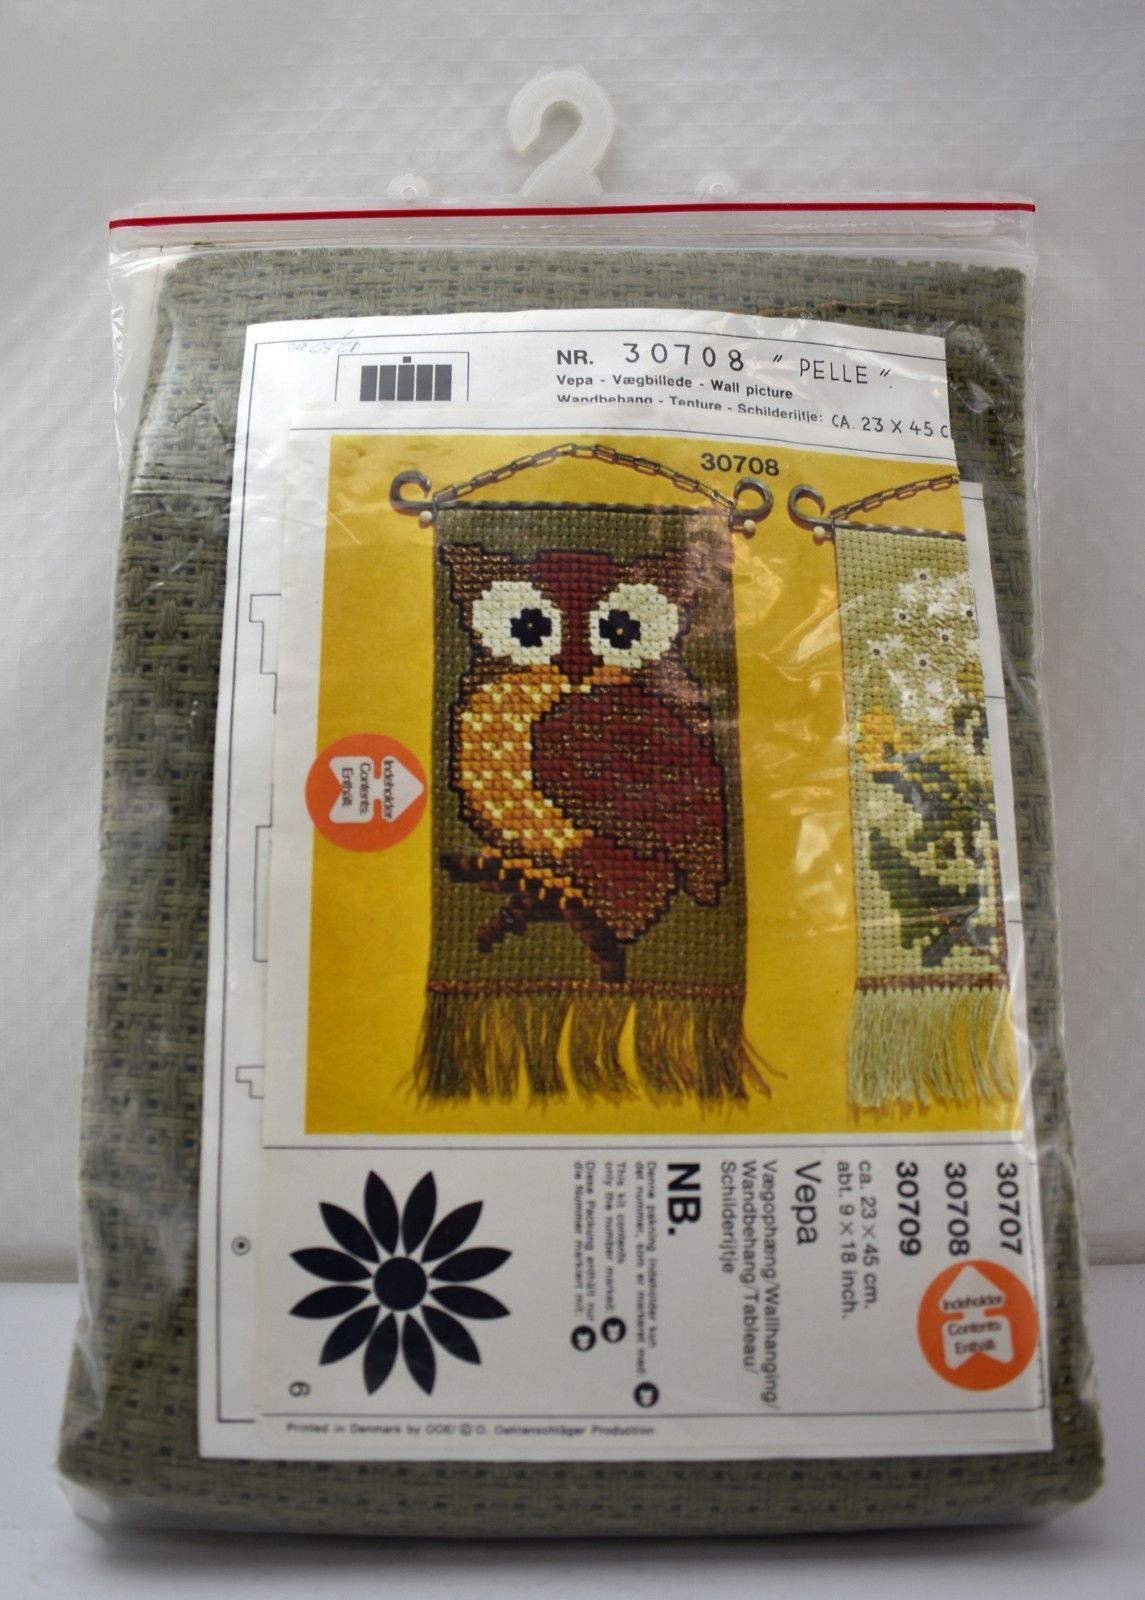 Vintage Oehlenschlager Owl Embroidery Wall Hanging Kit 9" x 18" - Denmark - $28.45